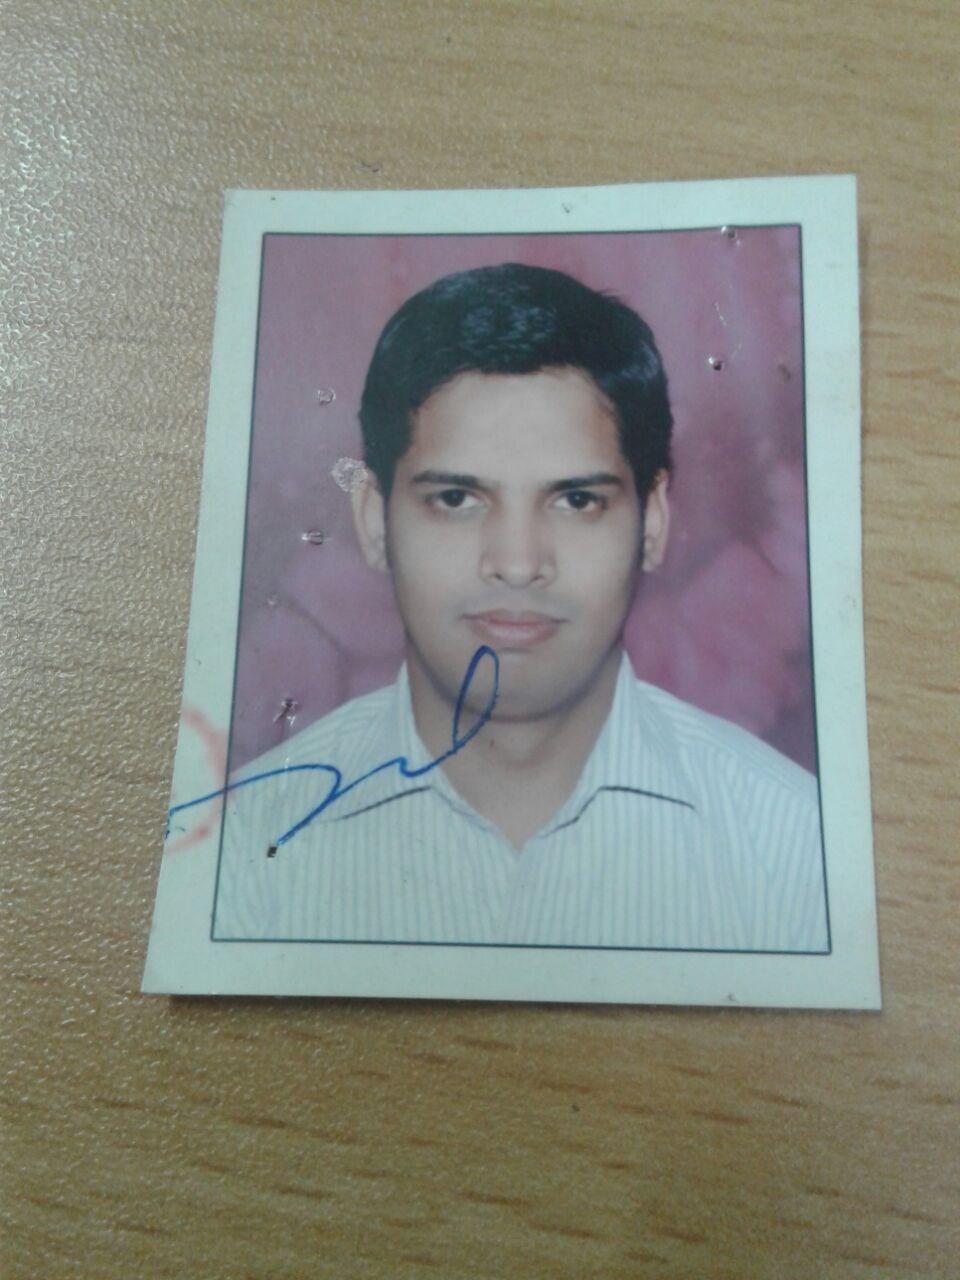 He appeared in job interview at K.B.I.( Krishna Beads Industries) where he got selected for the job in his first attempt. His salary there is 15,000 Rs. per month. He and his family are very happy.